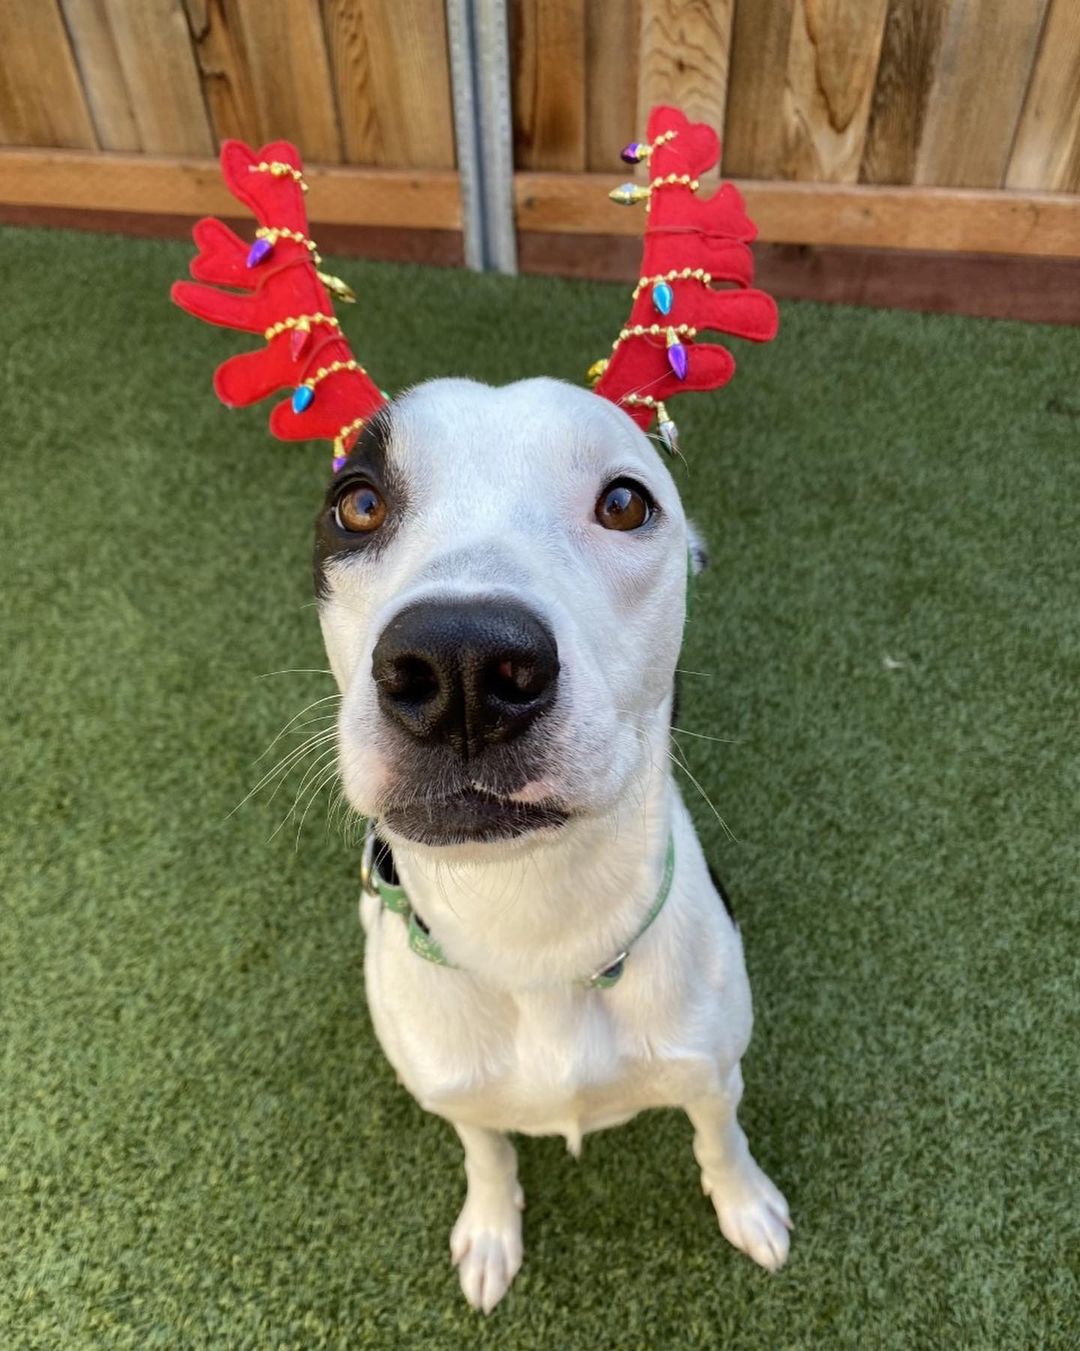 Bring cheer and joy to your family by helping a homeless dog find their new home this holiday season. 🐾💓 The sweet pups at Greenhill are ready to warm your couch and your heart, help make memories, & be the best co-pilots for life’s adventures! Adoption fees for all adult dogs (1 year and older) will be discounted by $50 during our Home for the Holidays promotion so adopters can spoil their new addition. Visit www.green-hill.org/adopt_dog to learn more about the lovable canines ready for their forever family.